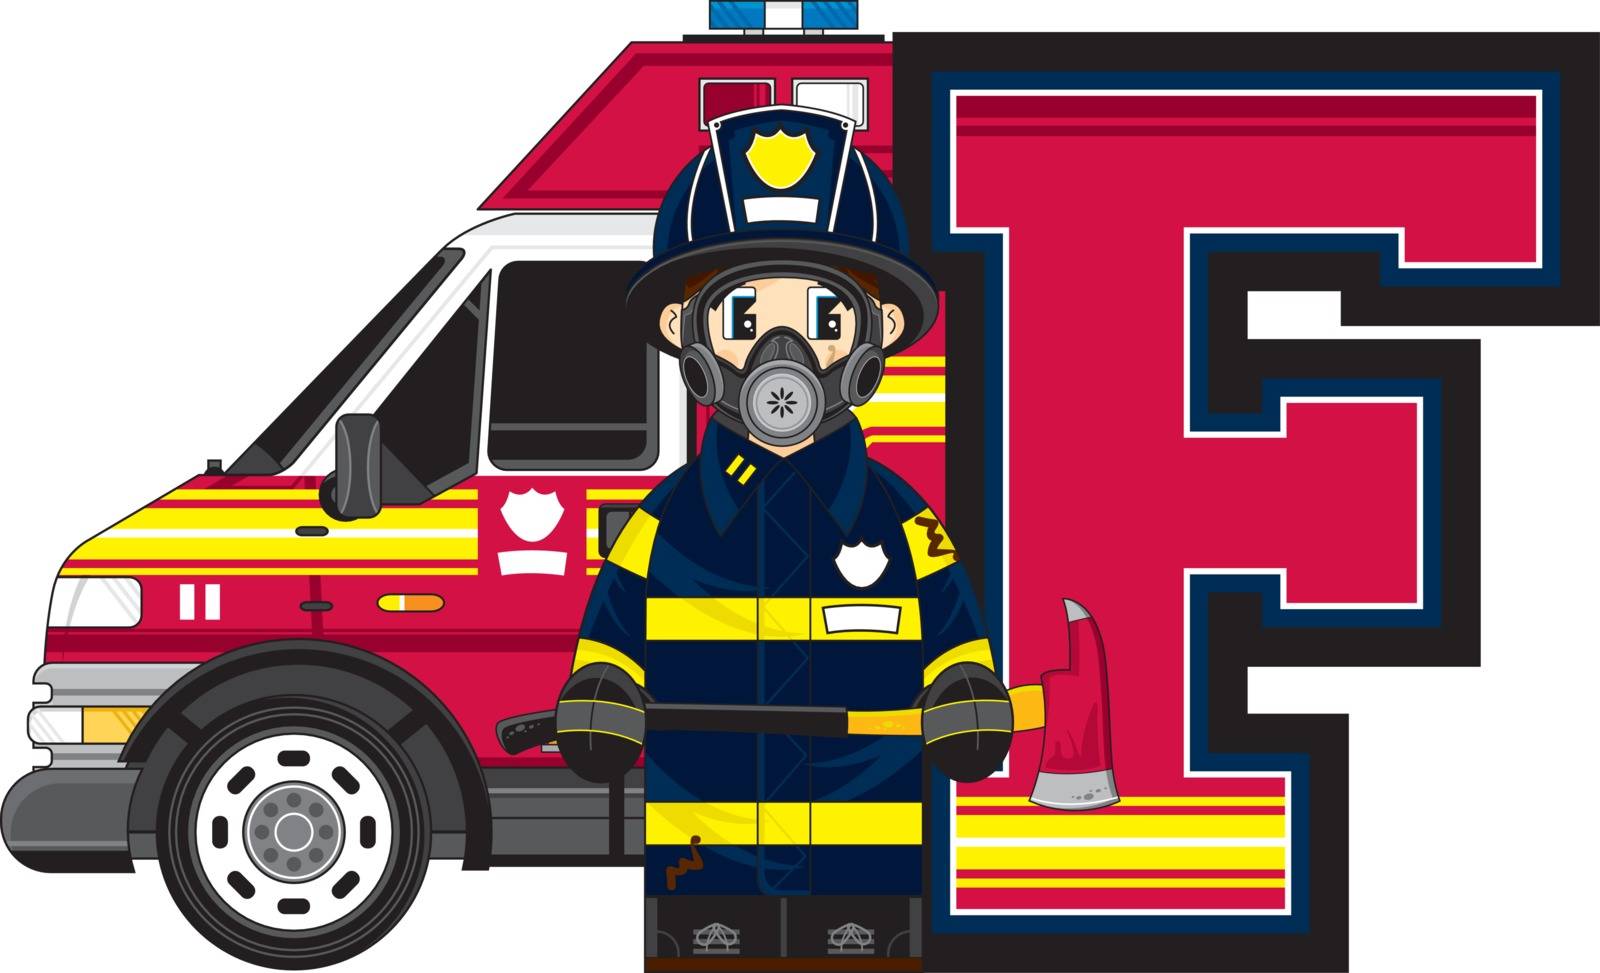 Cute Cartoon F is for Fireman with Fire Engine Alphabet Learning Illustration - by Mark Murphy Creative